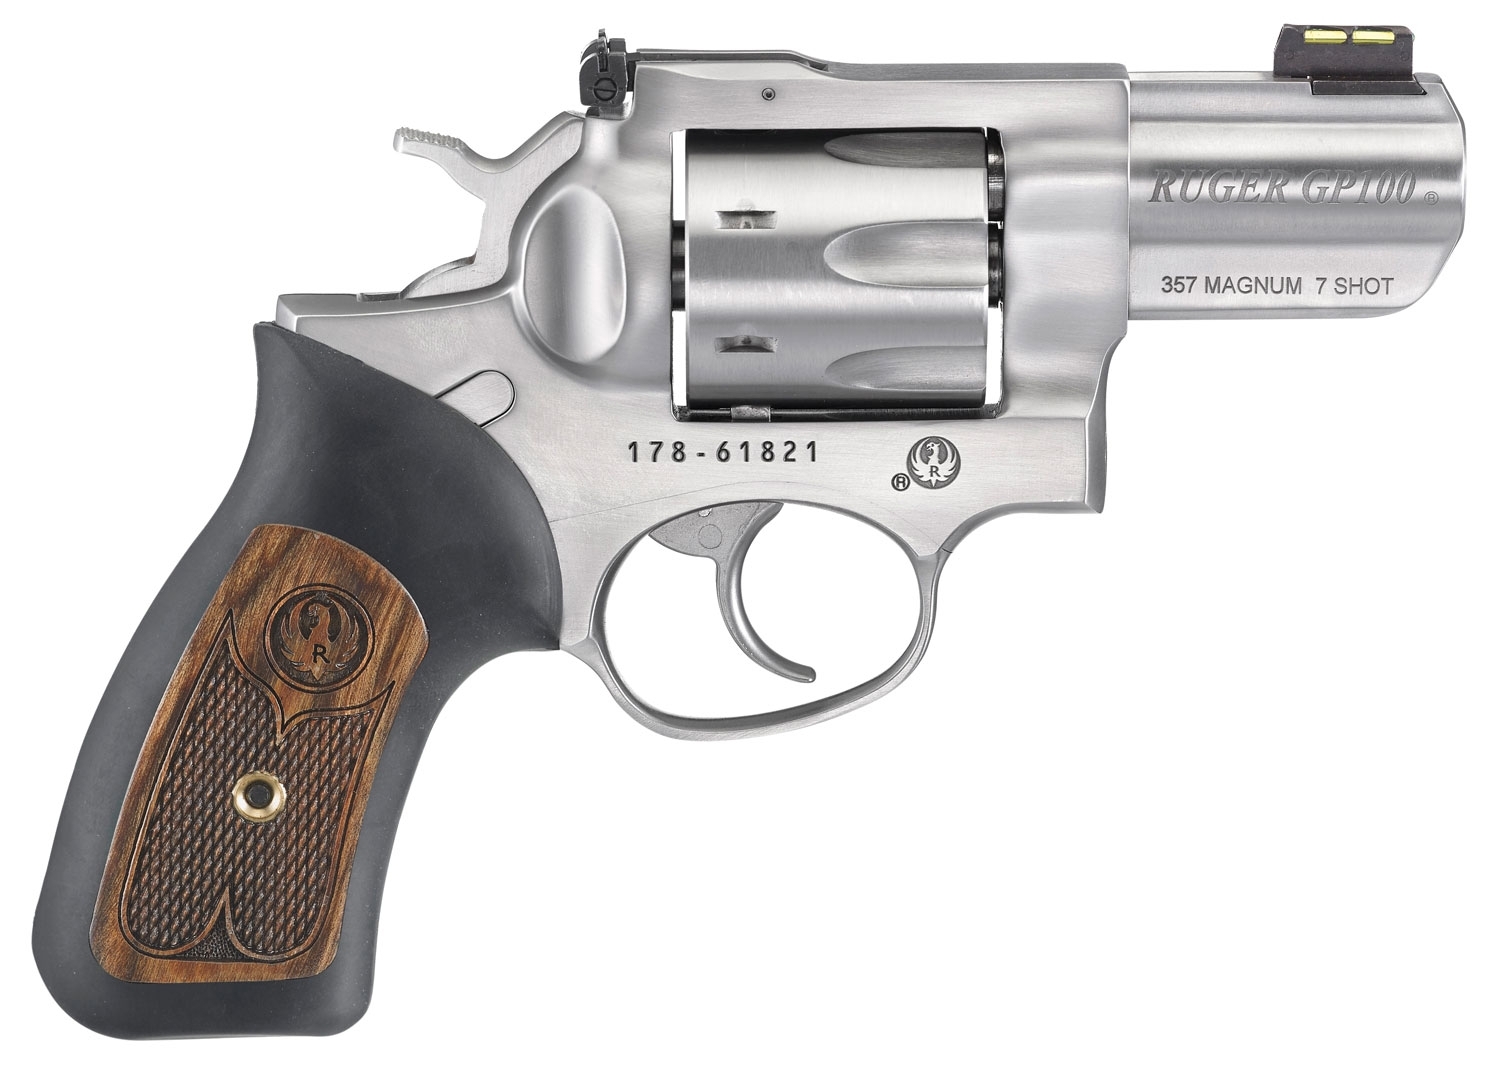 Ruger Gp100 357 Magnum Double Action 7 Shot 25 Revolver 1774 The